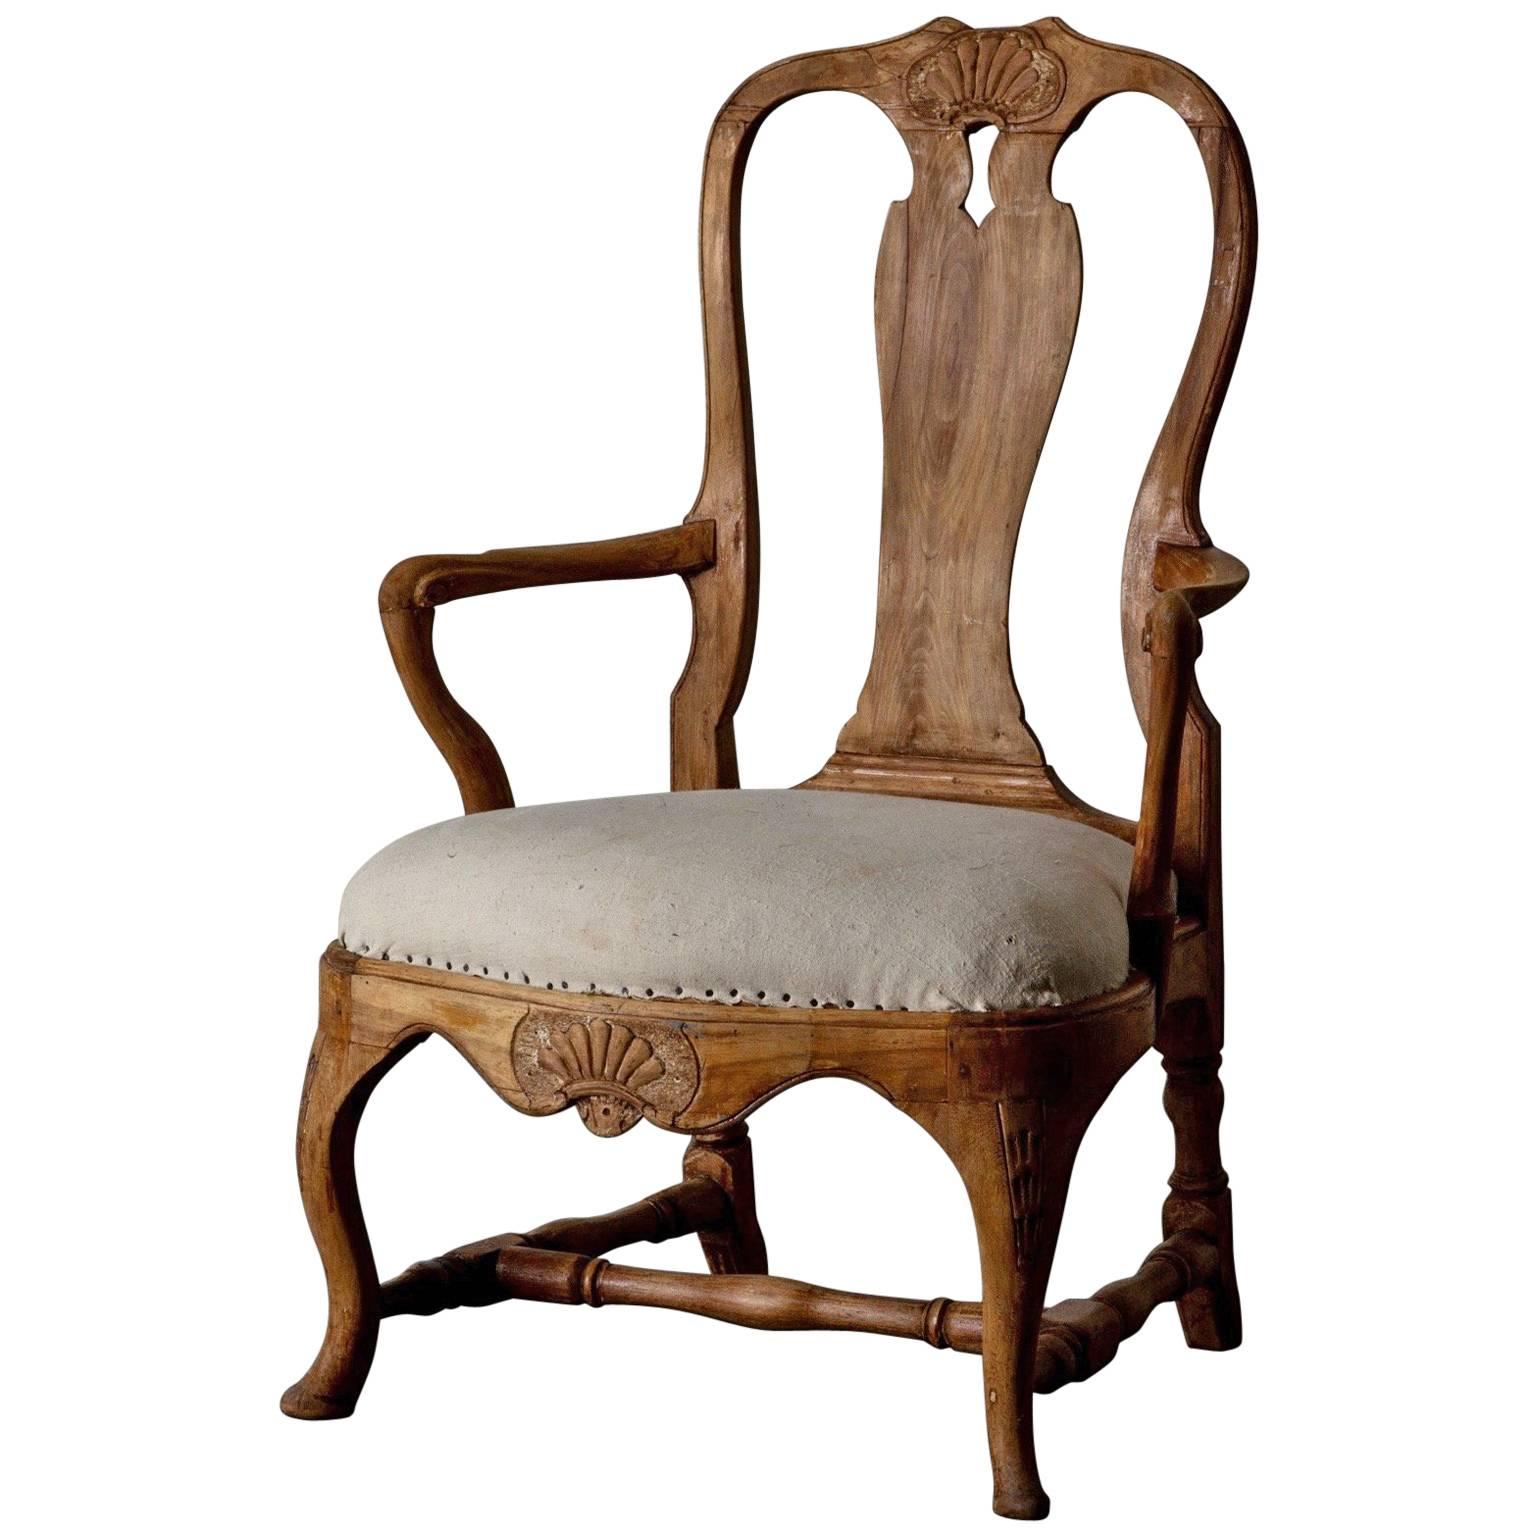 Armchair Swedish Rococo Period Natural Wood, 18th Century, Sweden